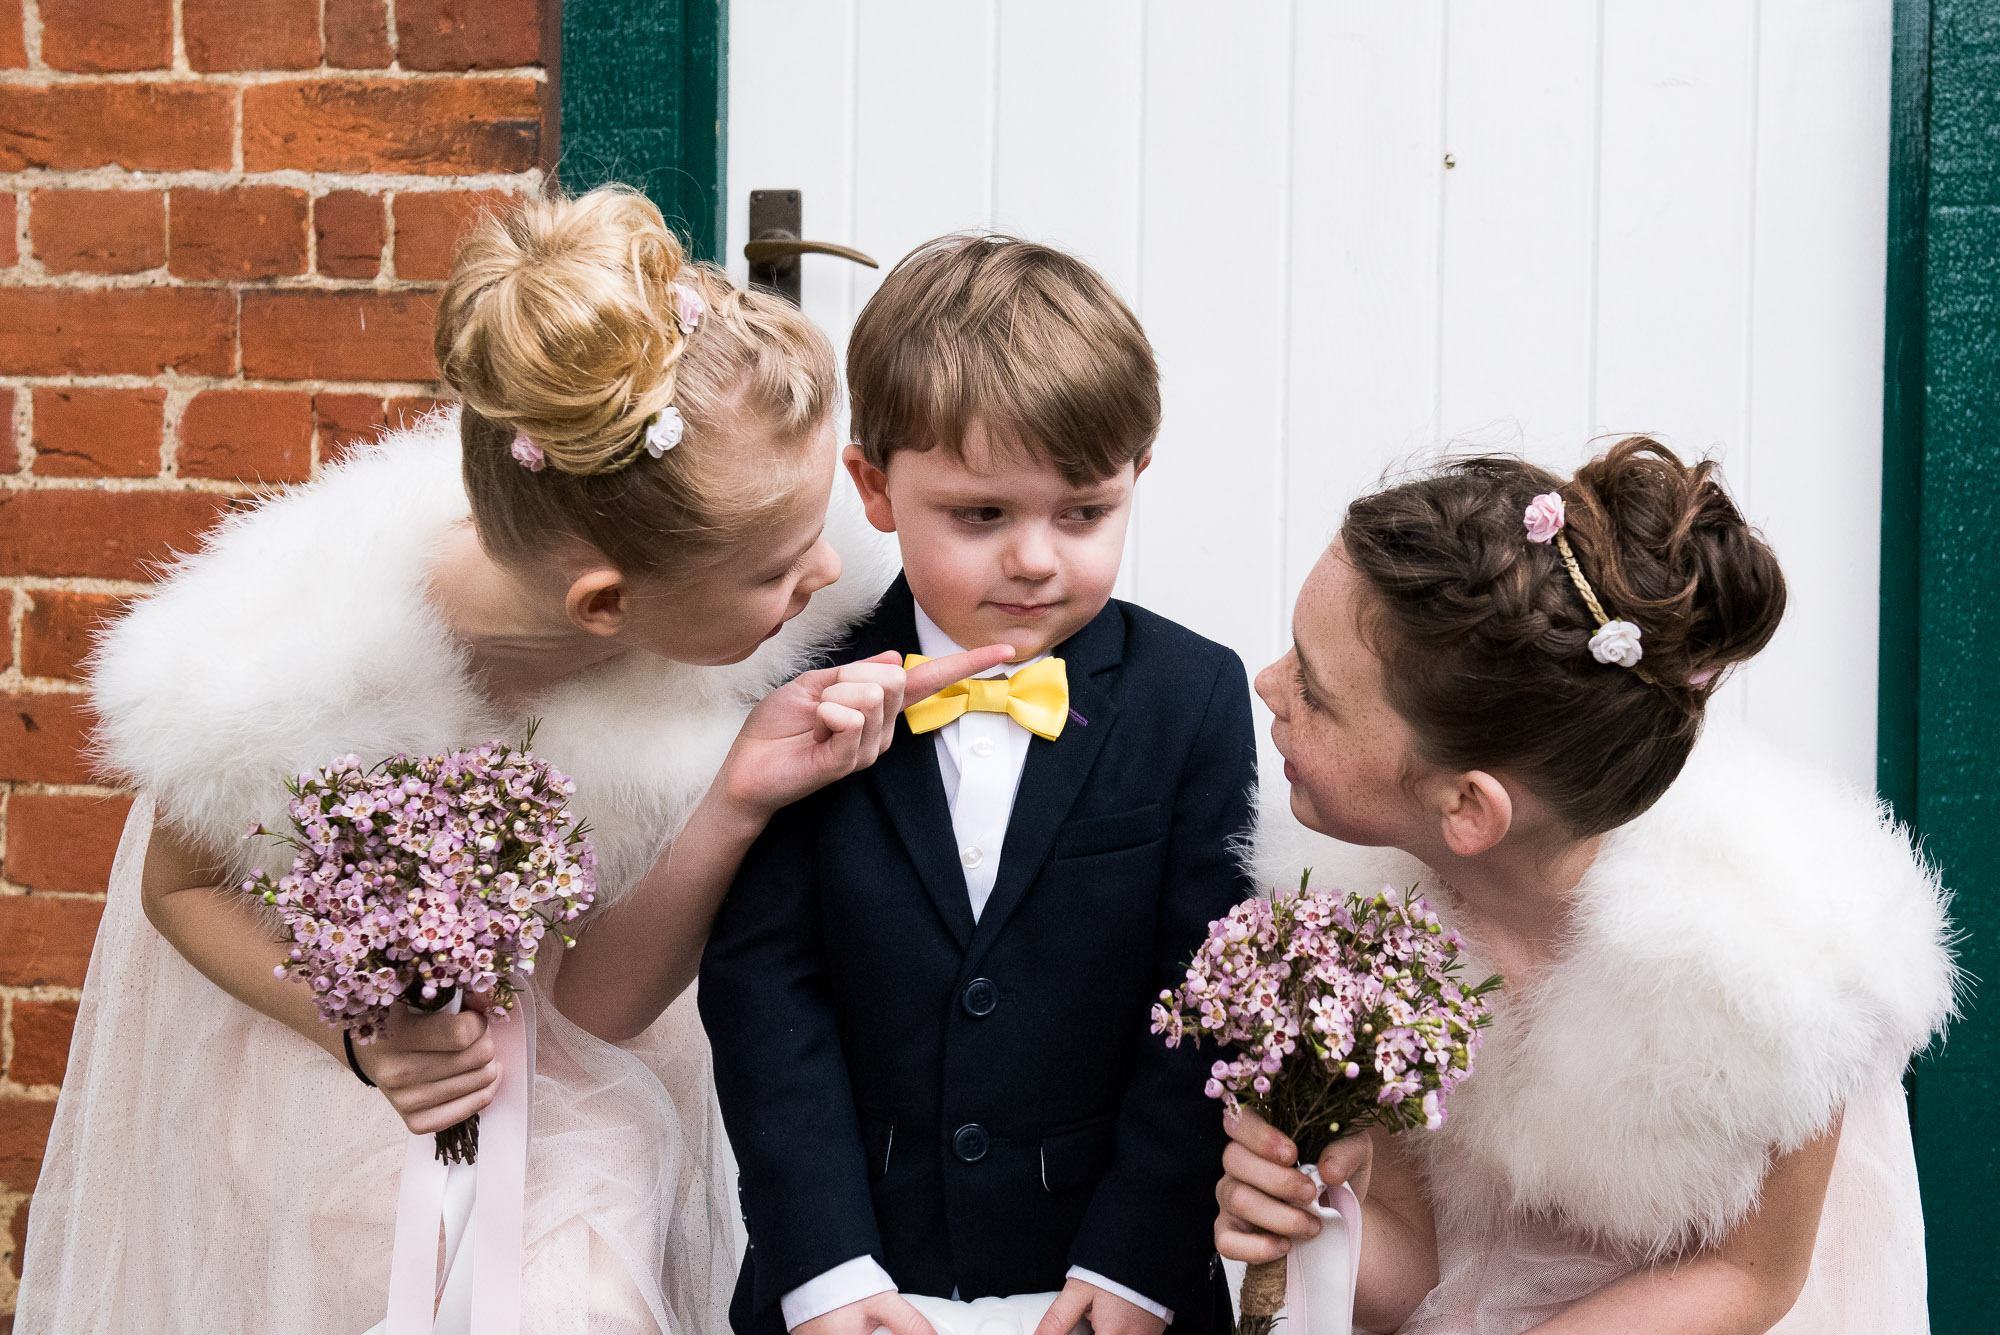 Flower girls trying to convince the ring bearer to smile